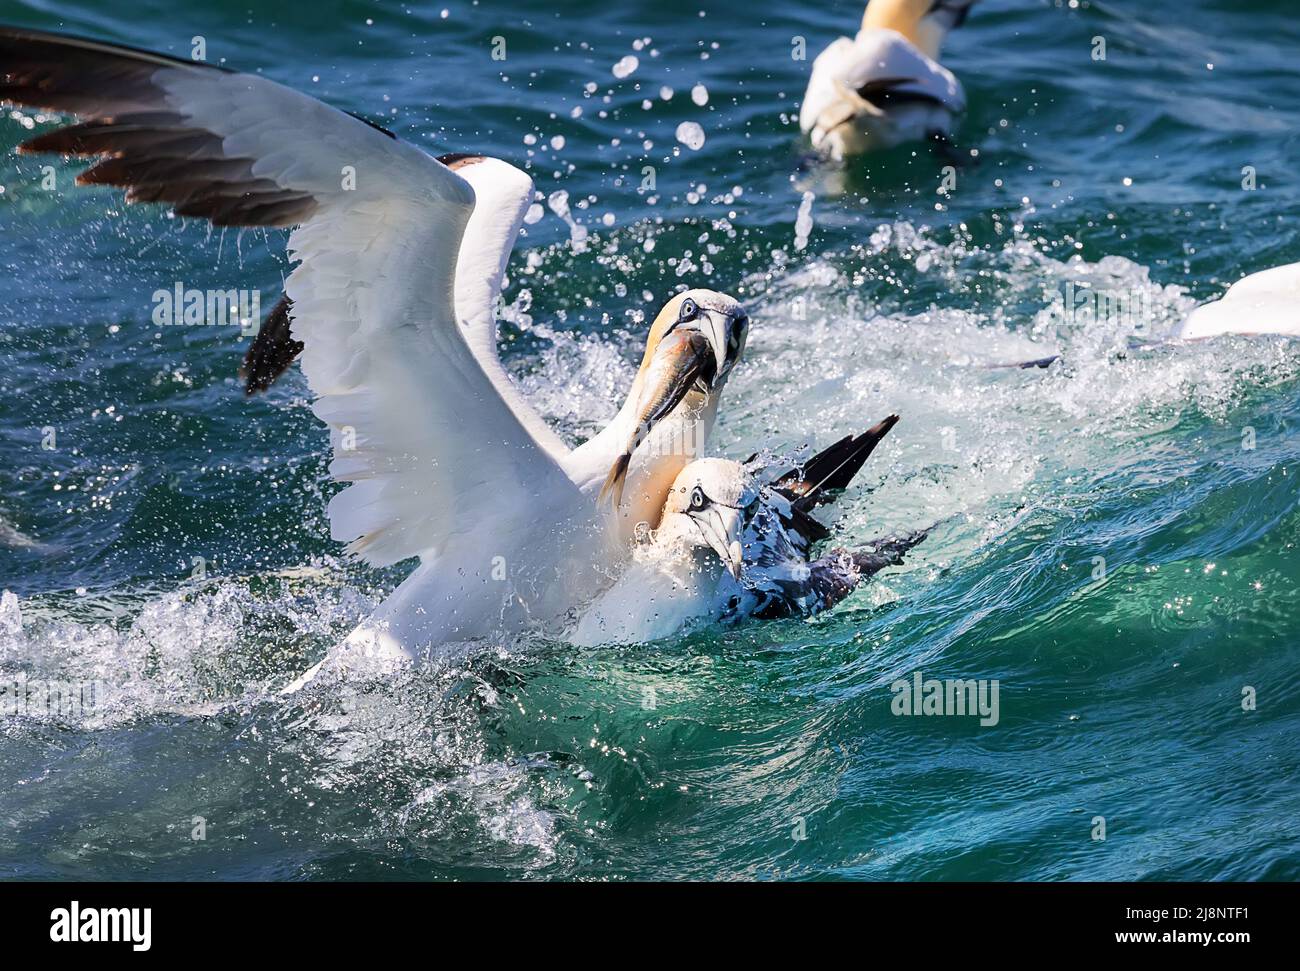 Northern gannets are eating fish in the North Sea, near Bempton Cliffs, Yorkshire coast, UK Stock Photo